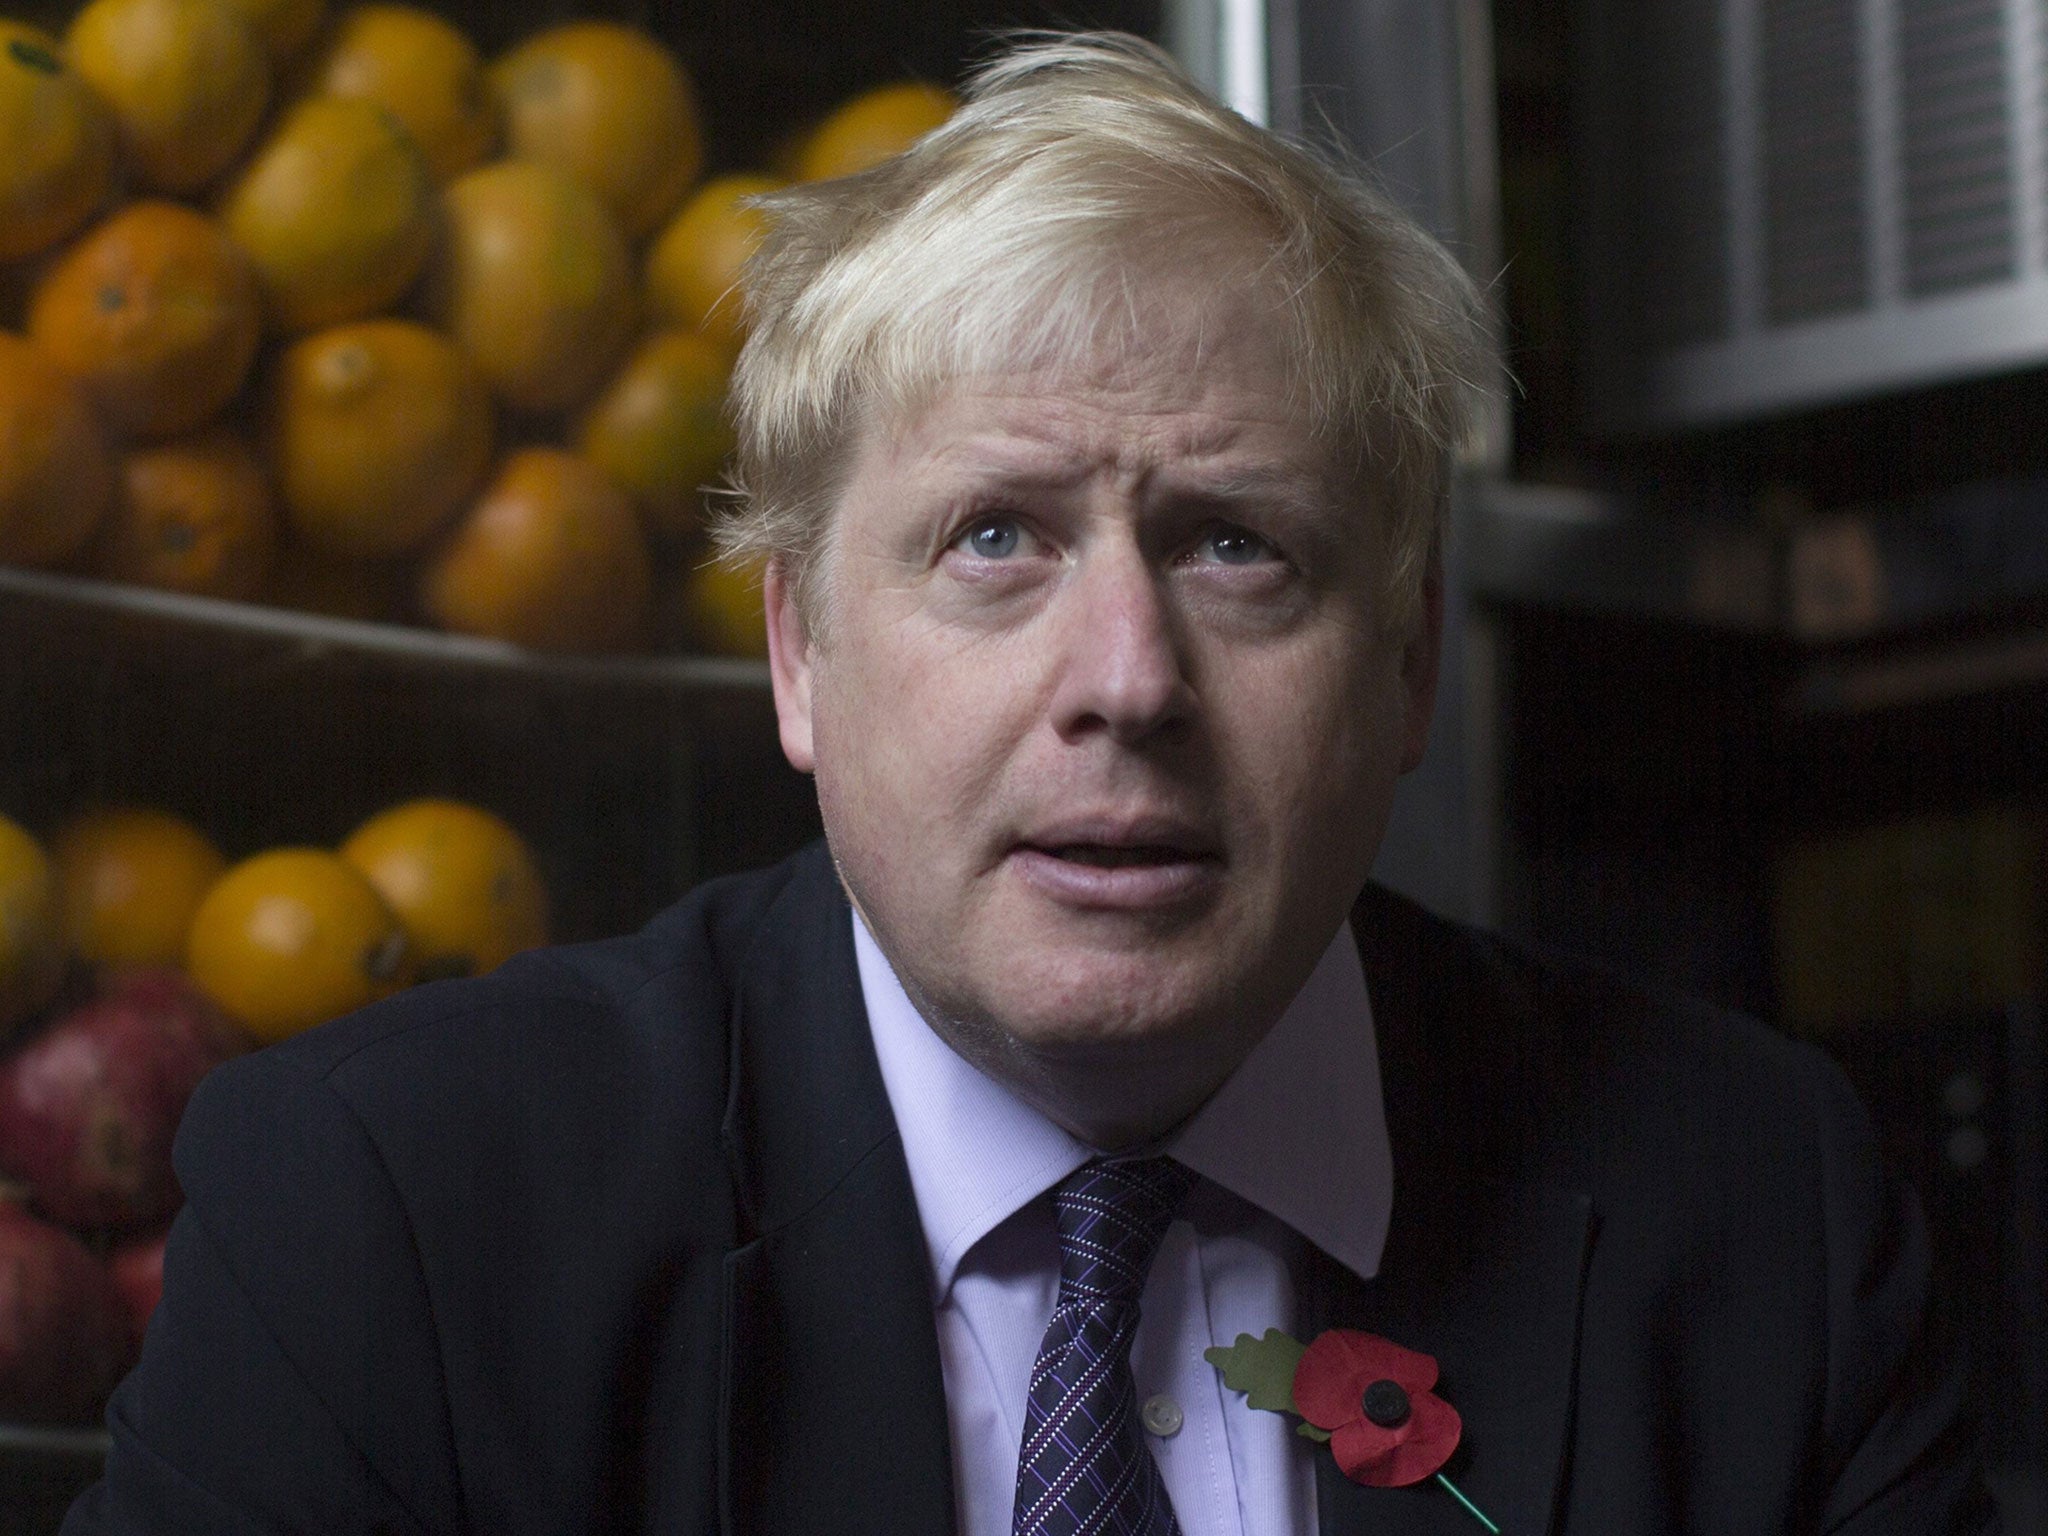 Mayor of London Boris Johnson in a Palestinian cafe during a tour of the Old City of Jerusalem, 11 November 2015.